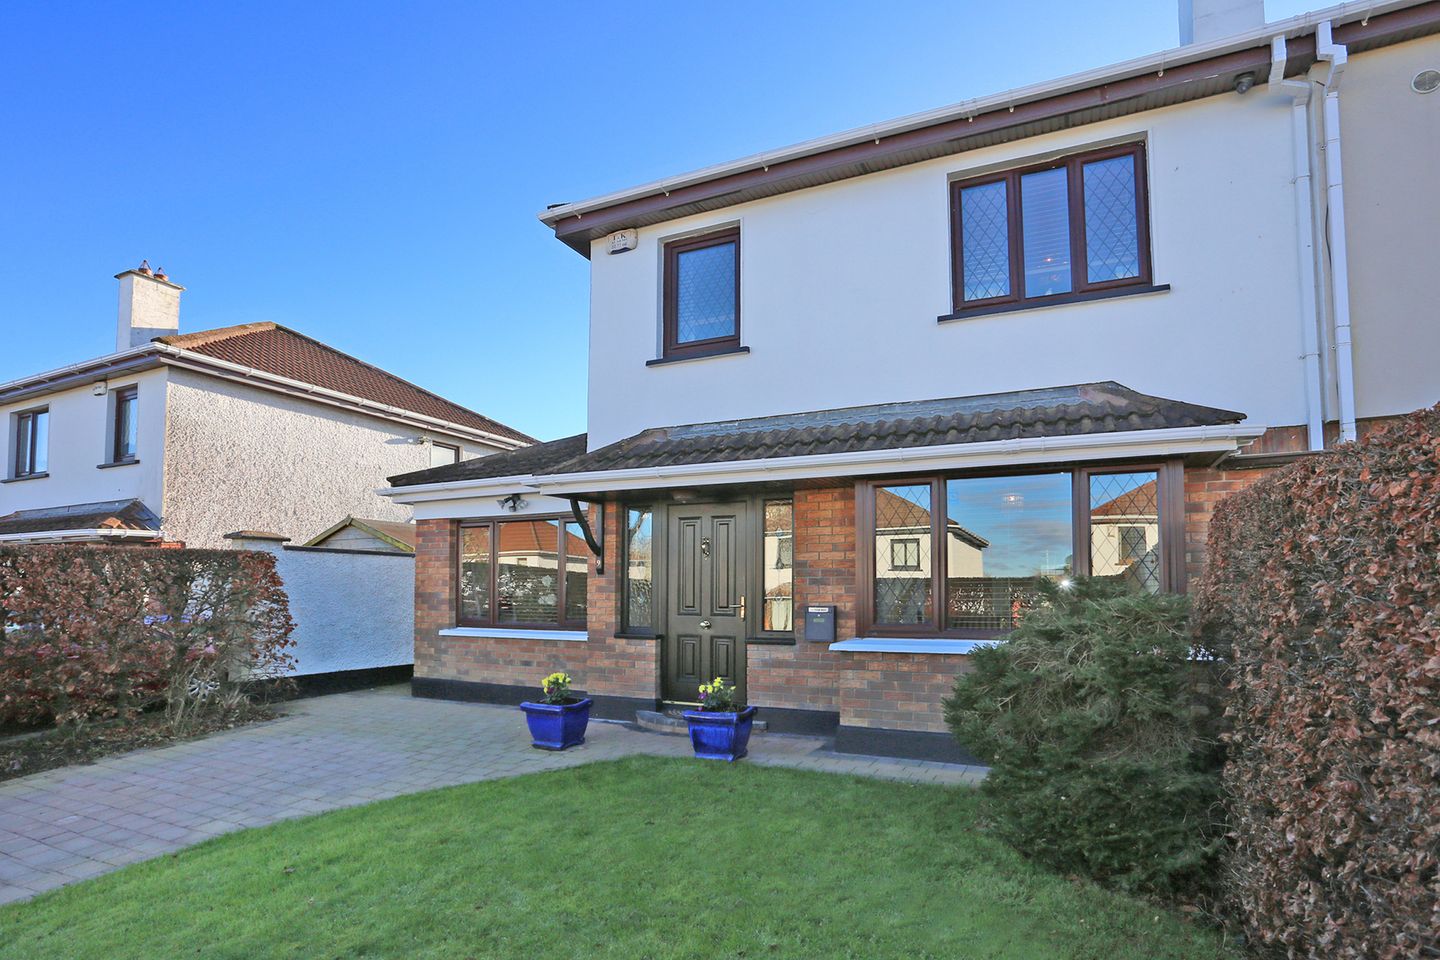 9 Russell Close, Fr Russell Road, Raheen, Co. Limerick, V94AY2R